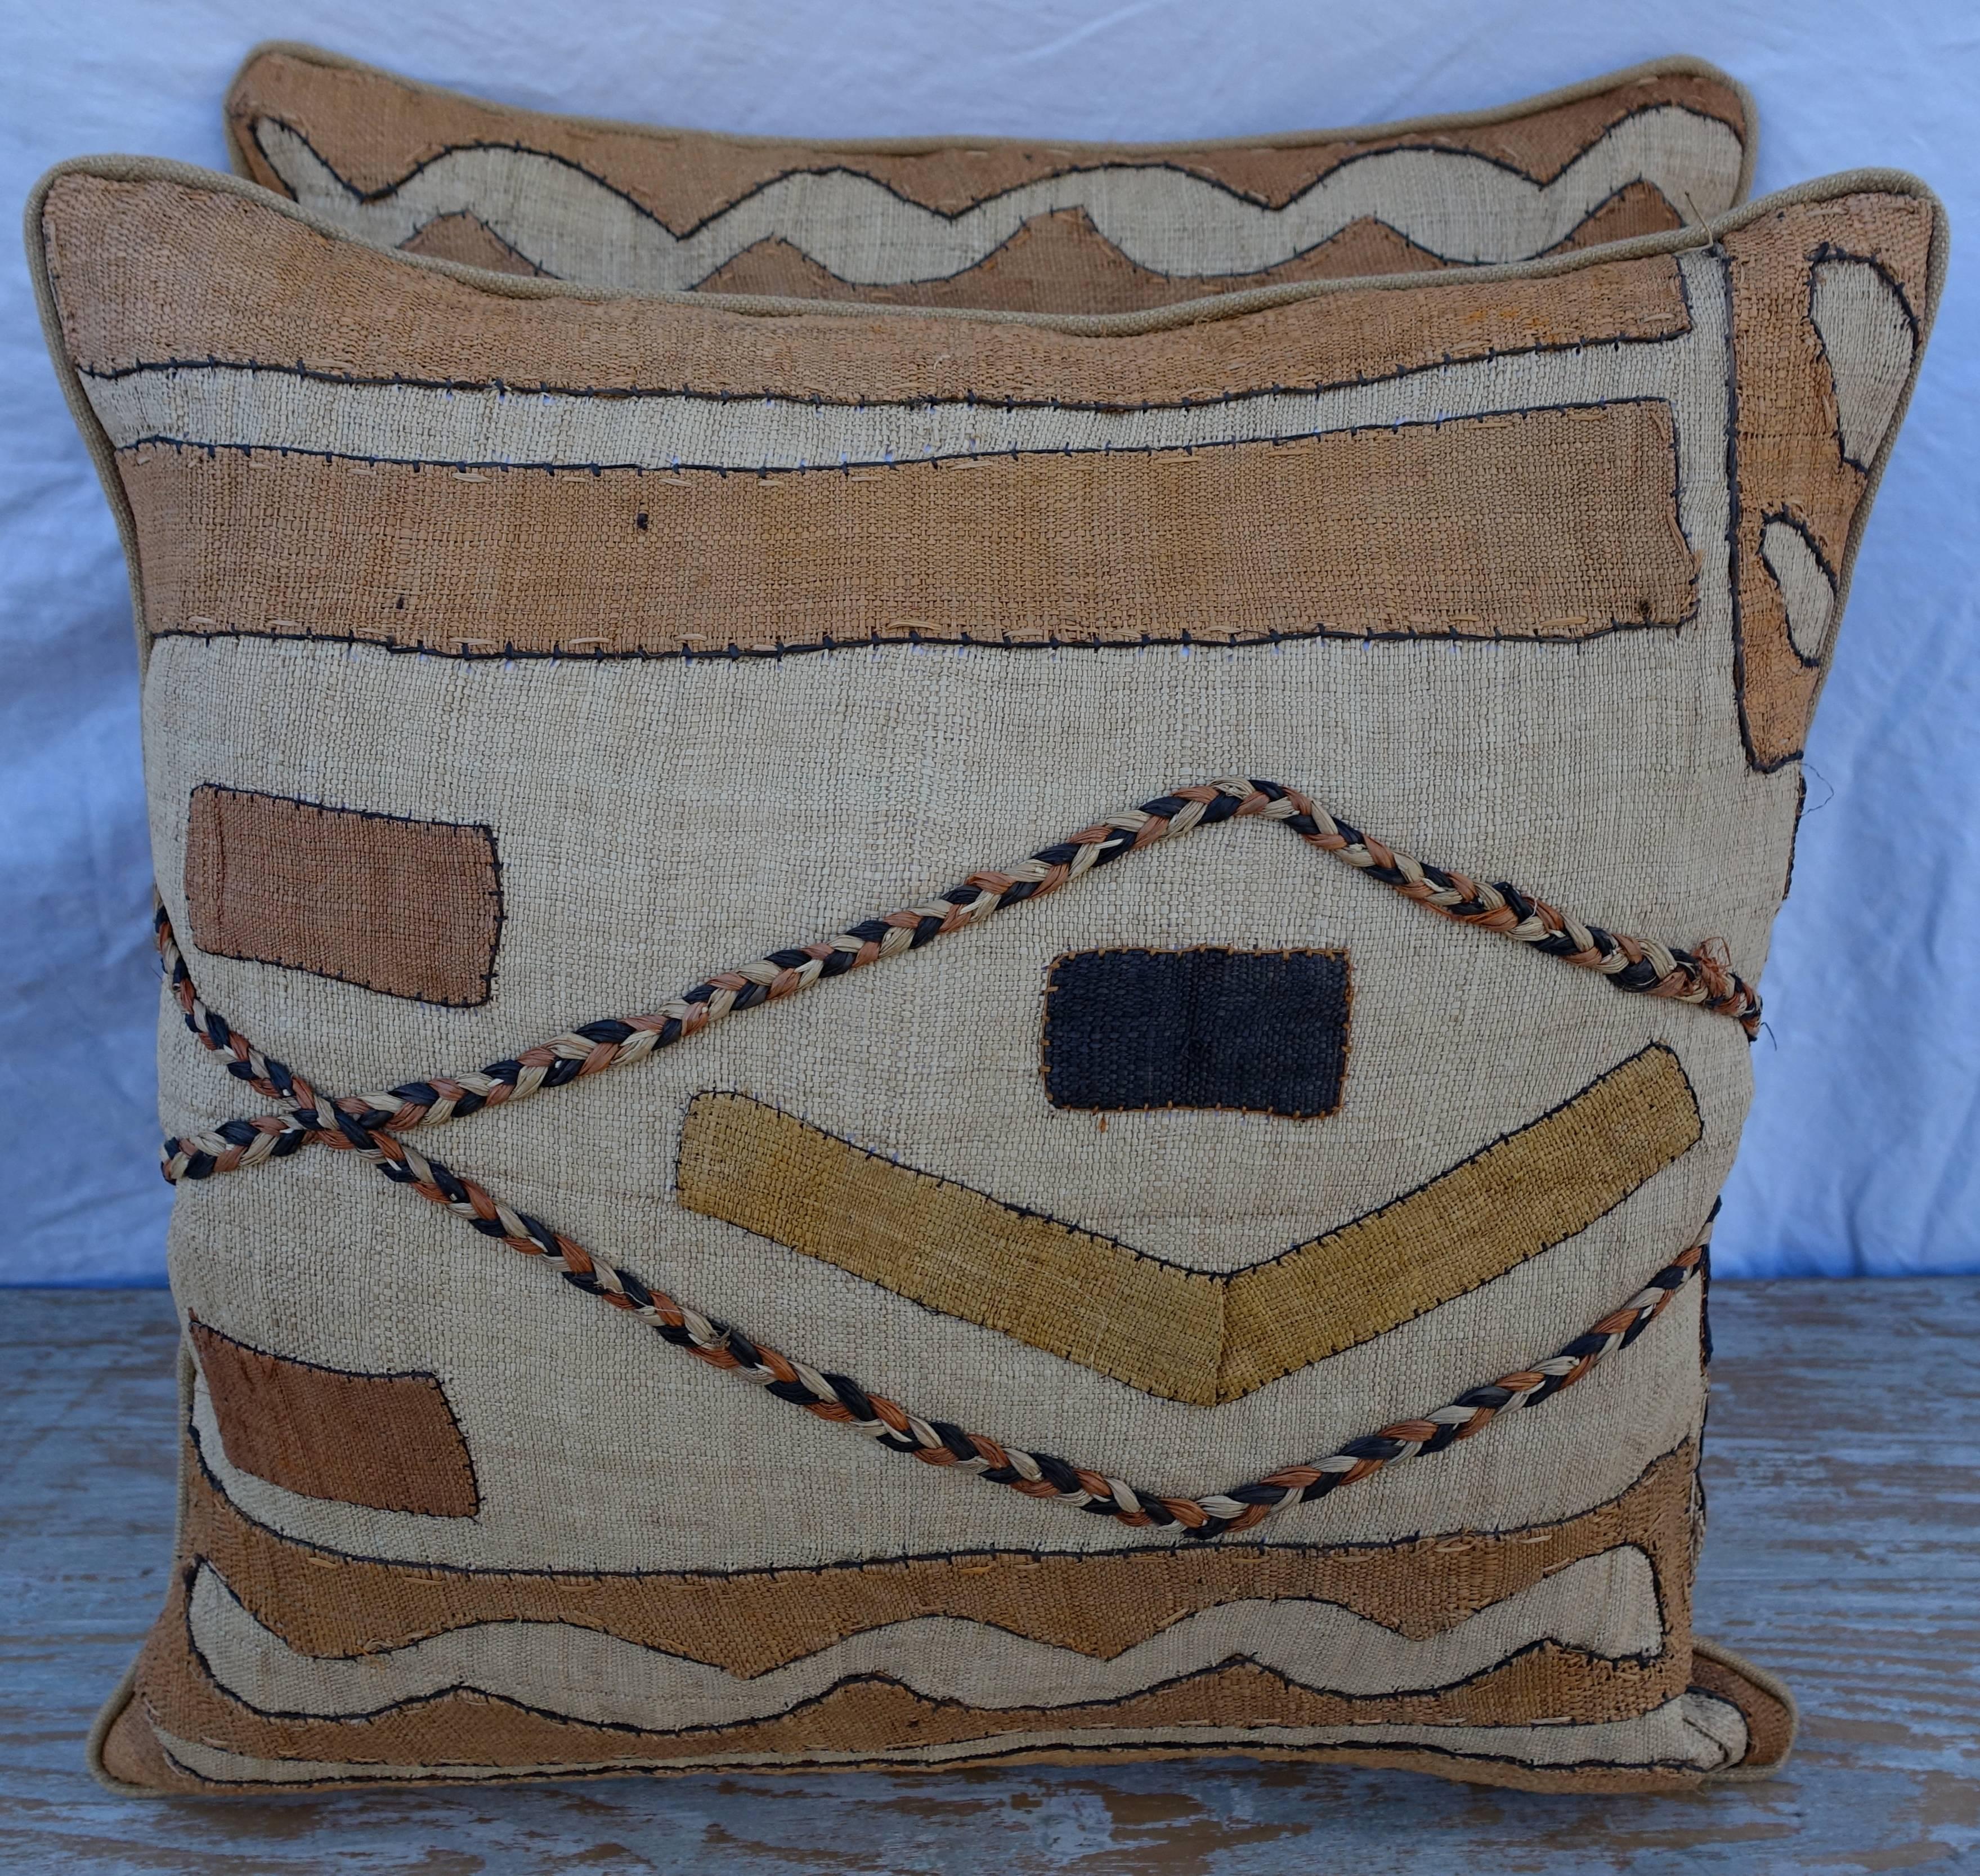 Pair of African Kuba cloth pillows with raffia Kuba cloth fronts in black, gold and cream coloration and golden linen backs. The pillows are finished with a self cord detail. Down inserts, sewn closed.